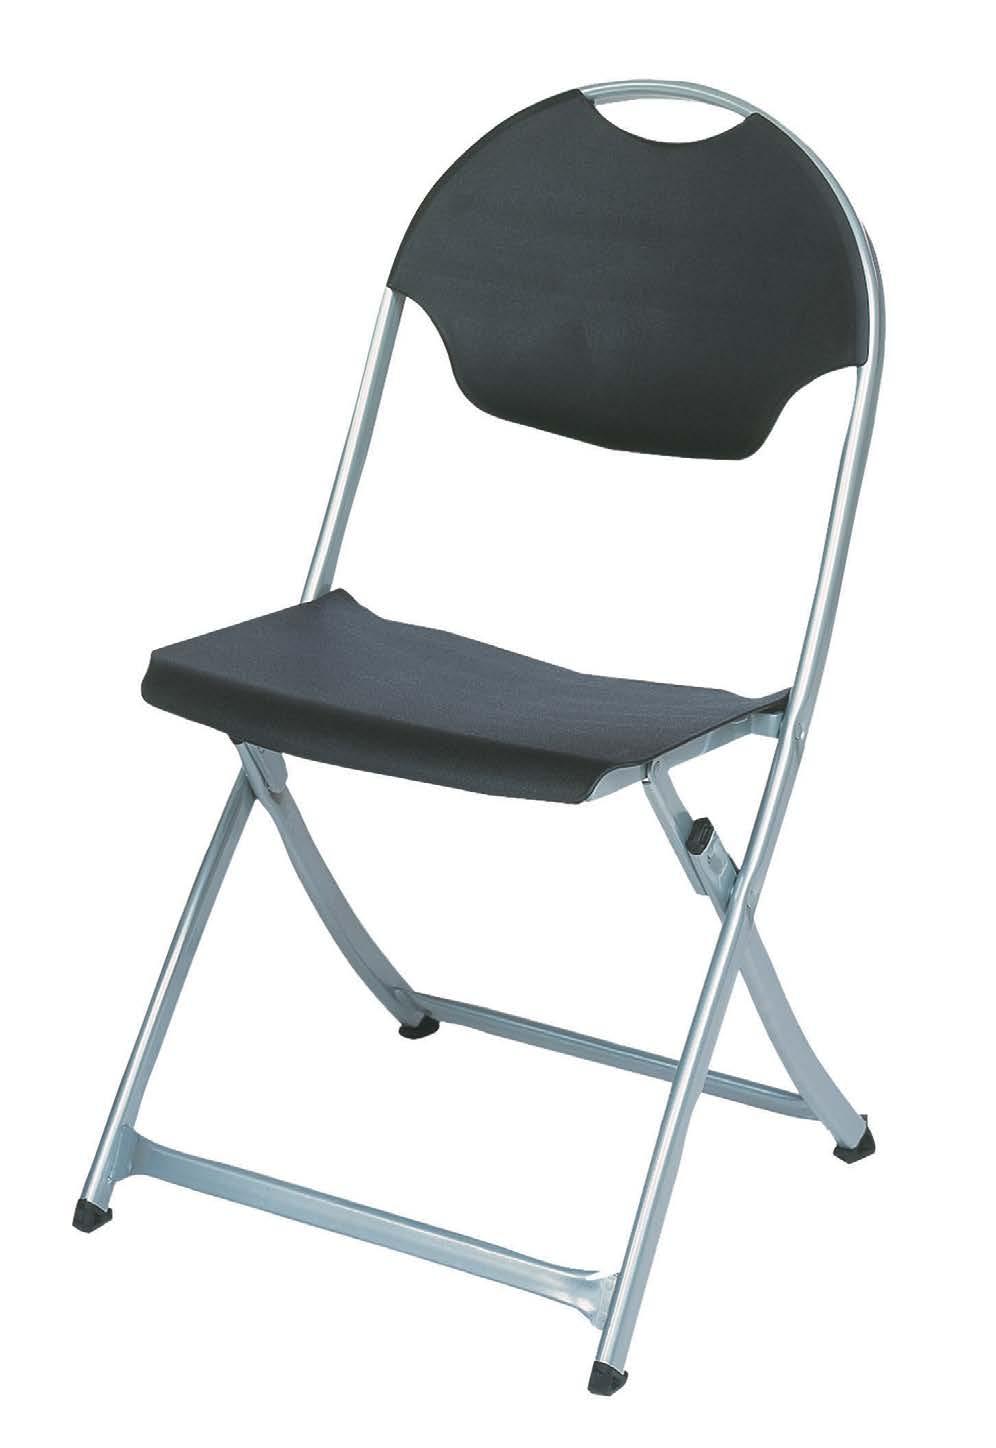 The SwiftSet folding chair is the workhorse of MityLite s portable